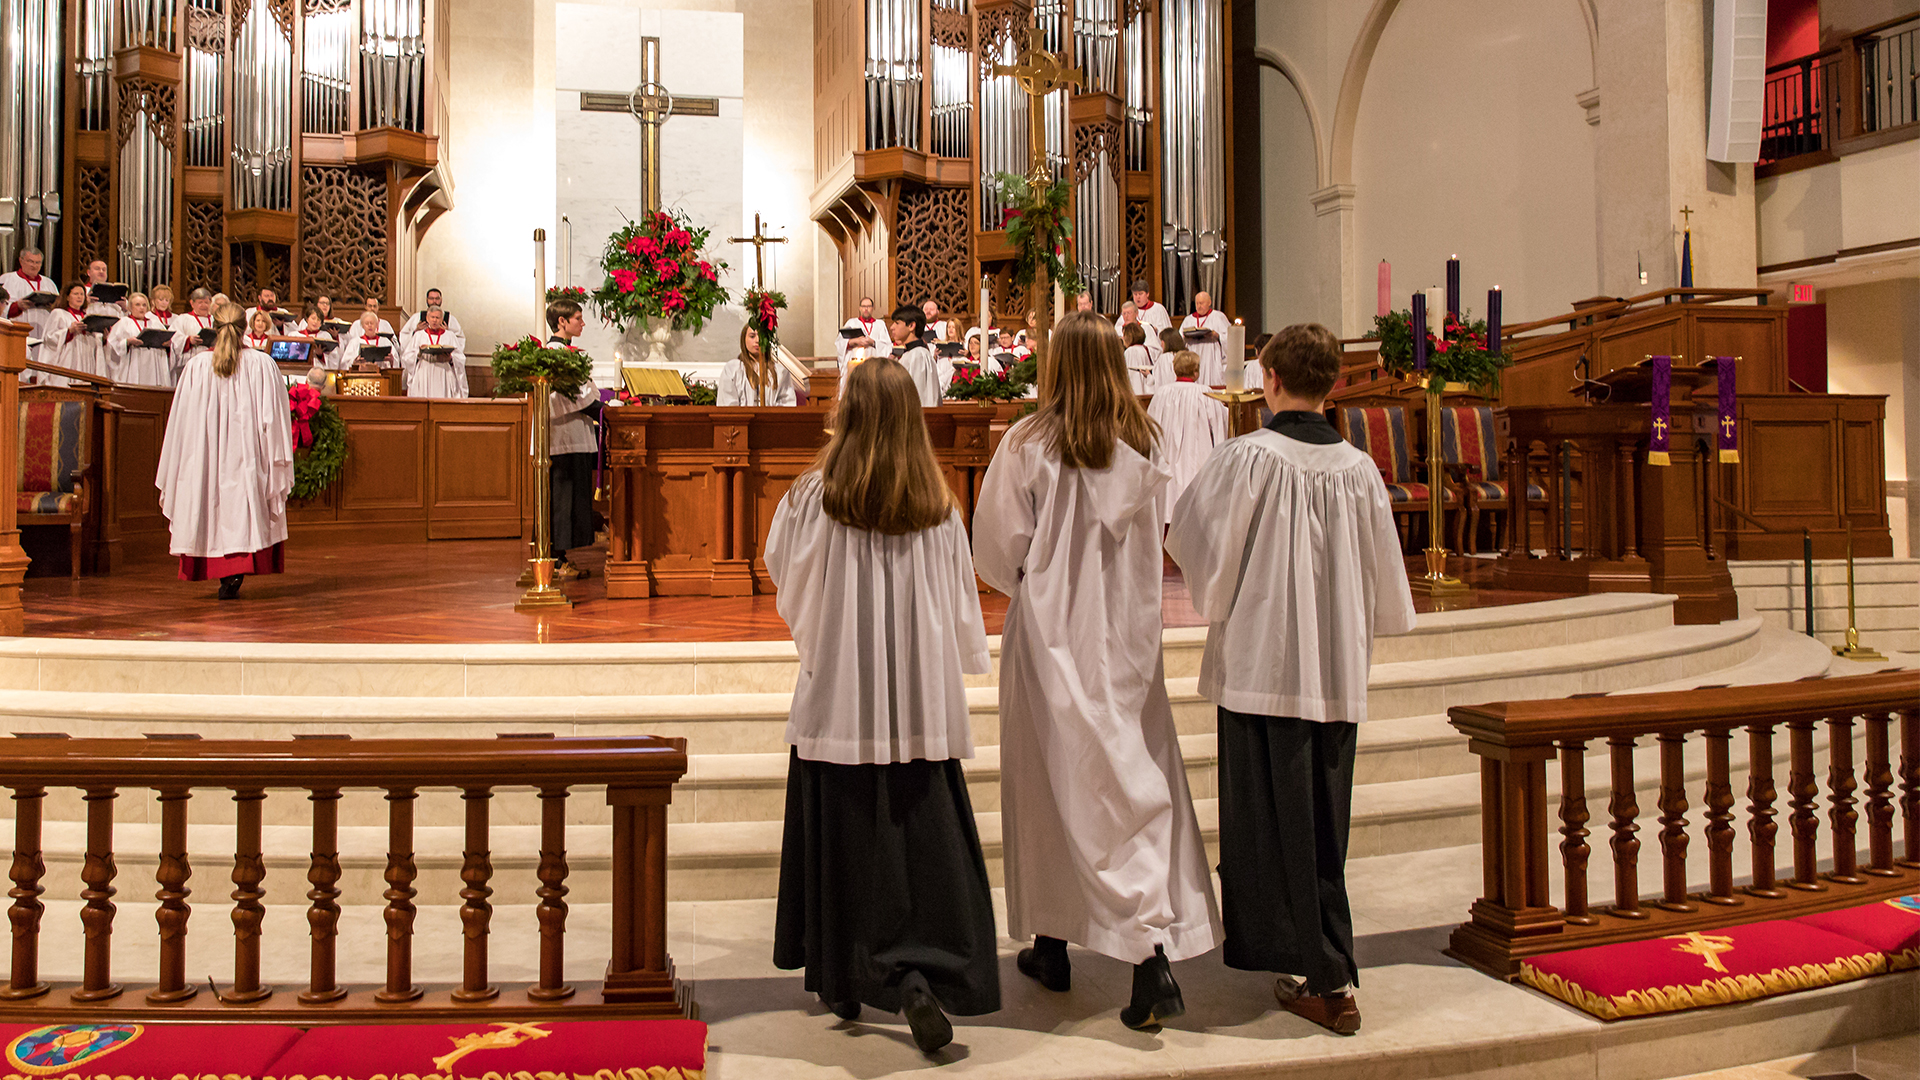 Acolytes Processing to the chancel altar of the church.